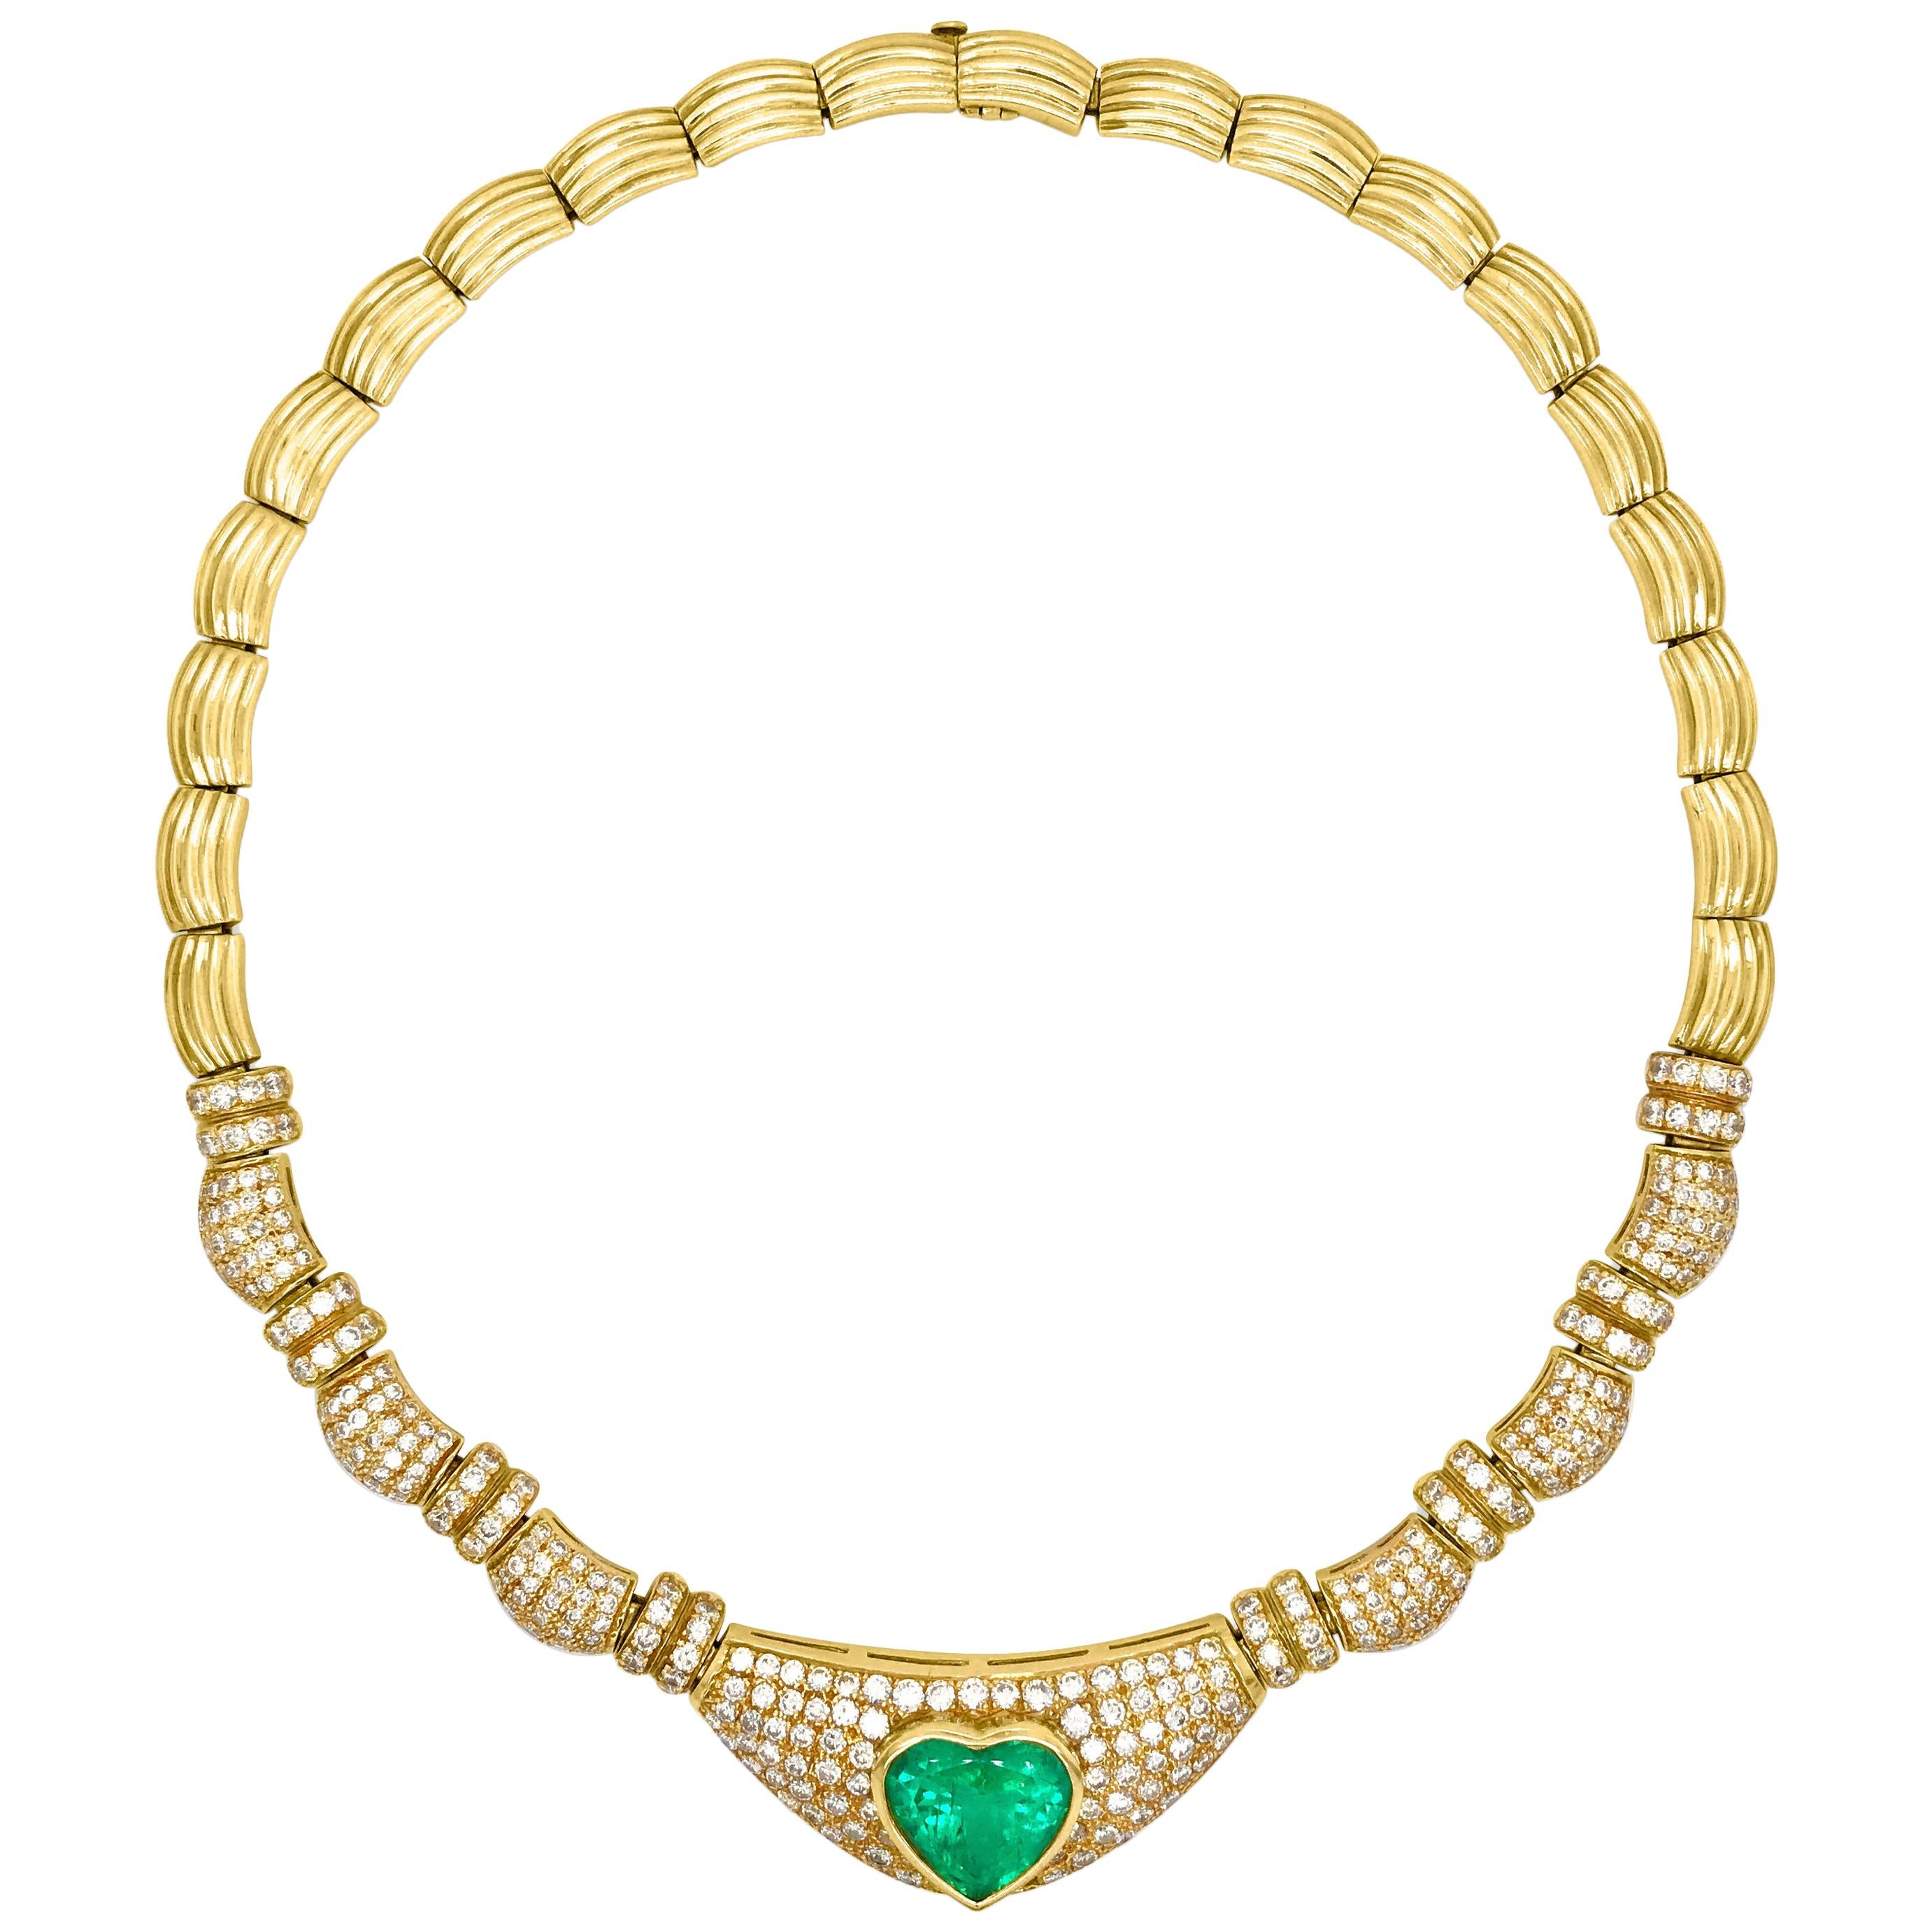 11.75 Carat Heart-Shaped Emerald and Diamond Necklace